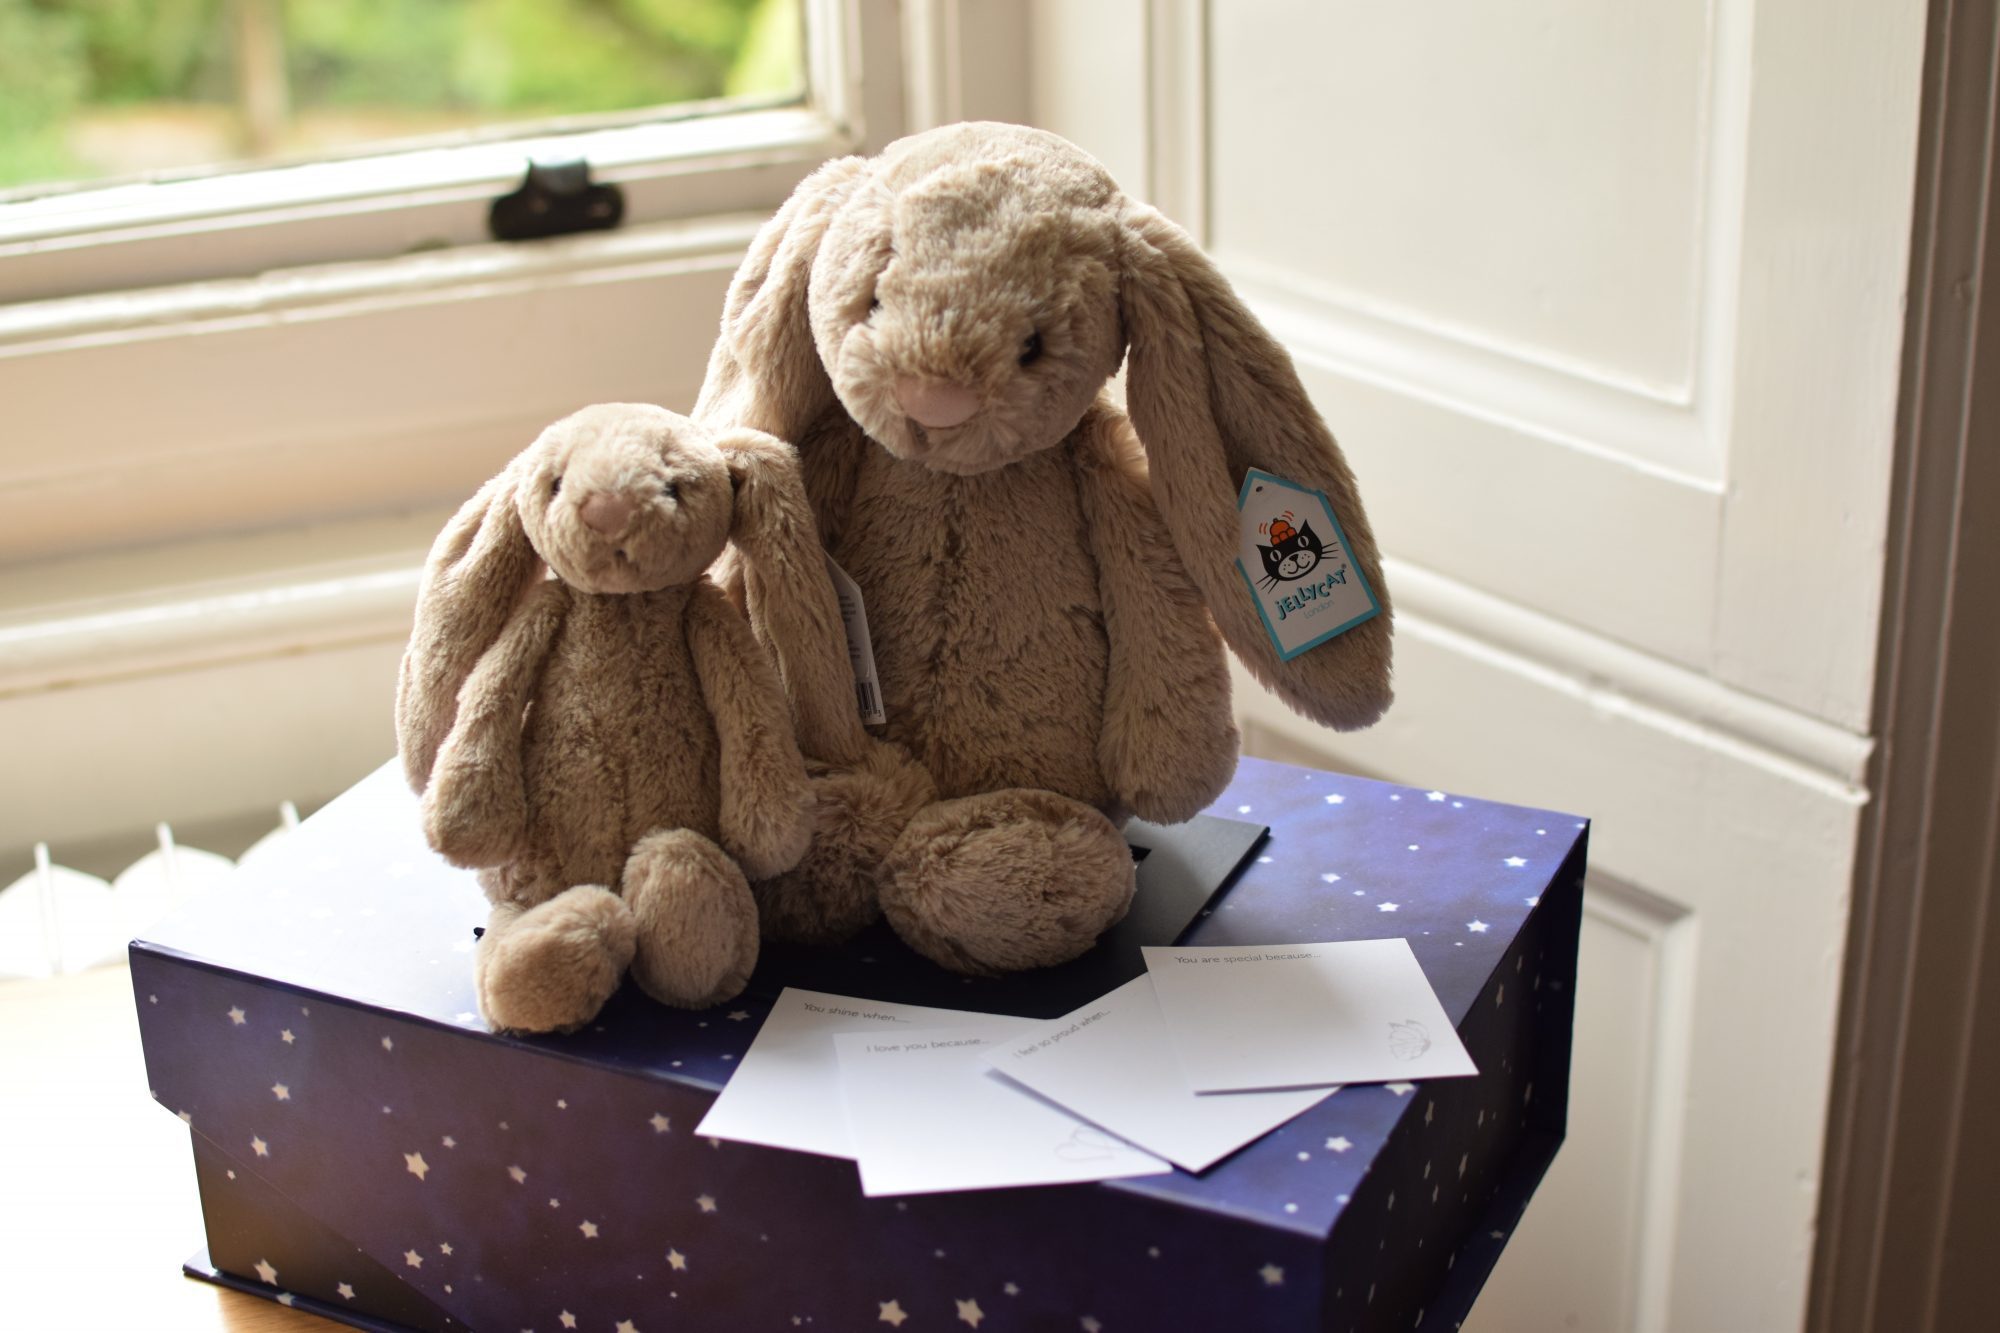 Two soft toy rabbits are placed on a purple memory box.